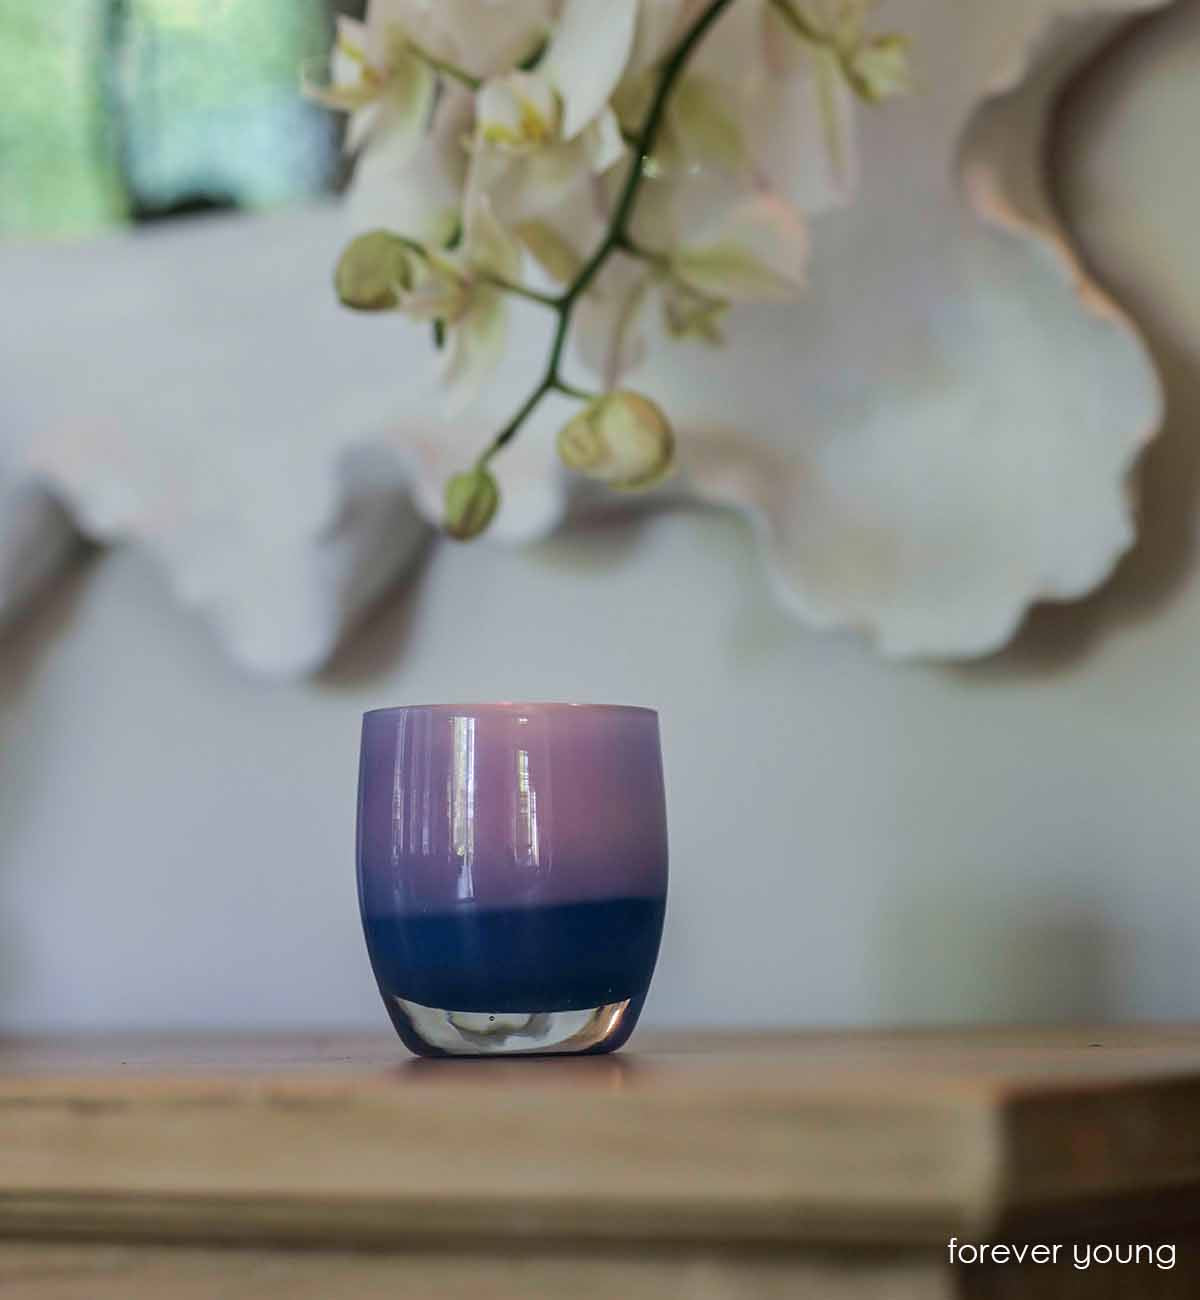 forever young, blue lit with a warm glowing flame on a wooden side table with an orchid bloom and mirror hanging behind. Hand-blown glass votive candle holder.